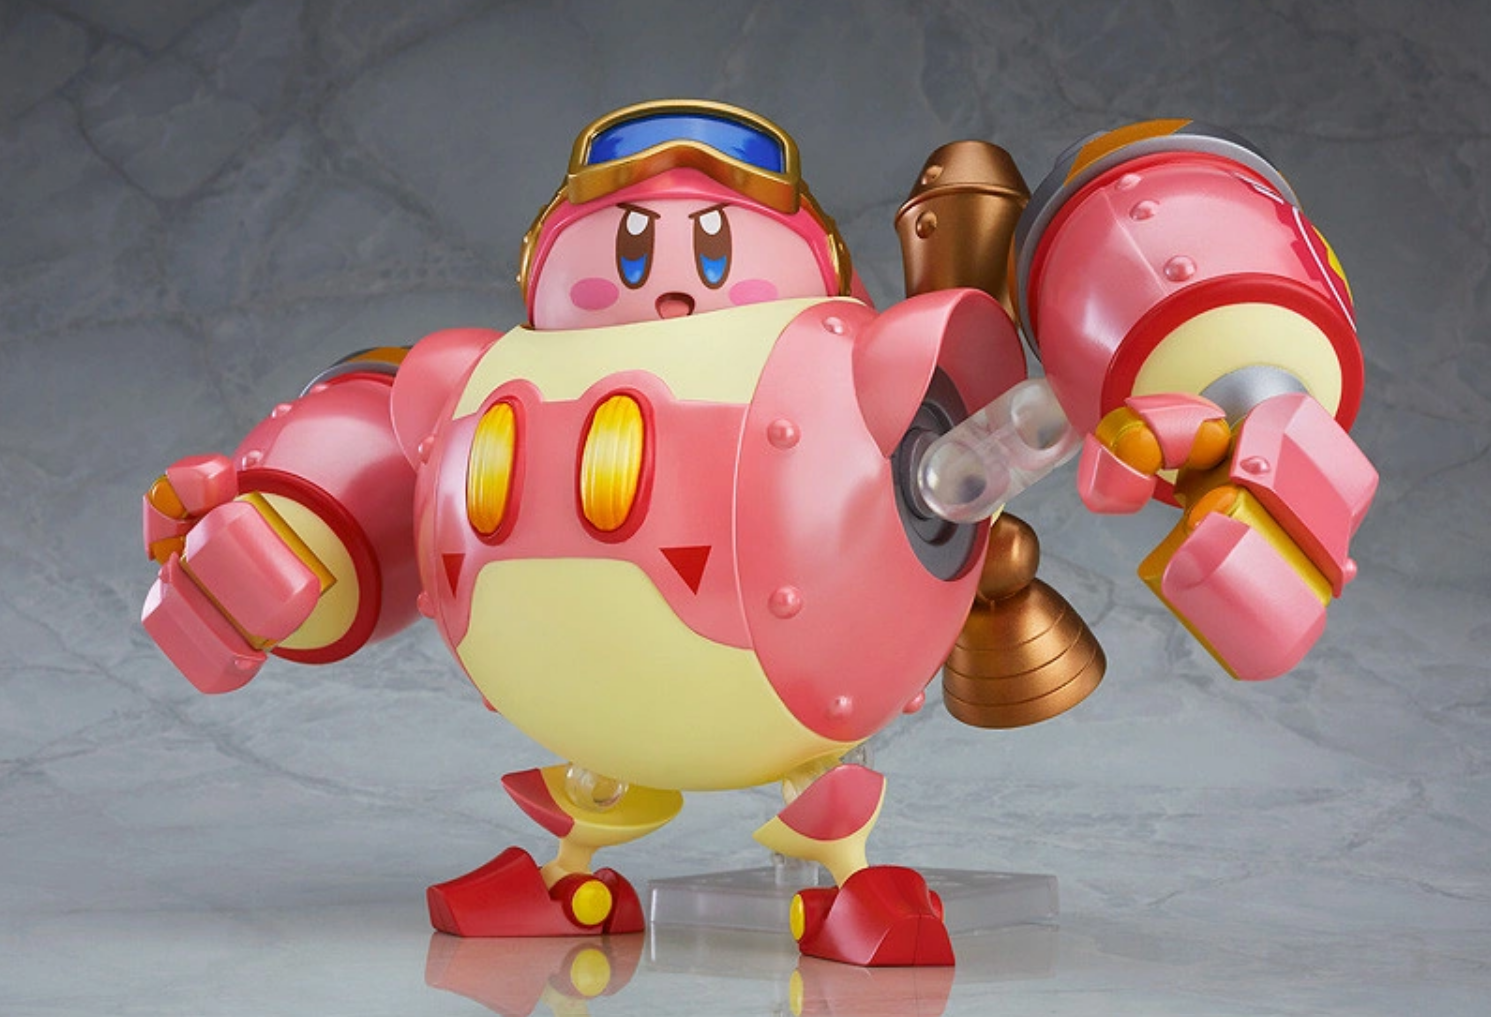 A Kirby figure, which the round pink character in a mech suit. The toy is created by Good Smile Company.